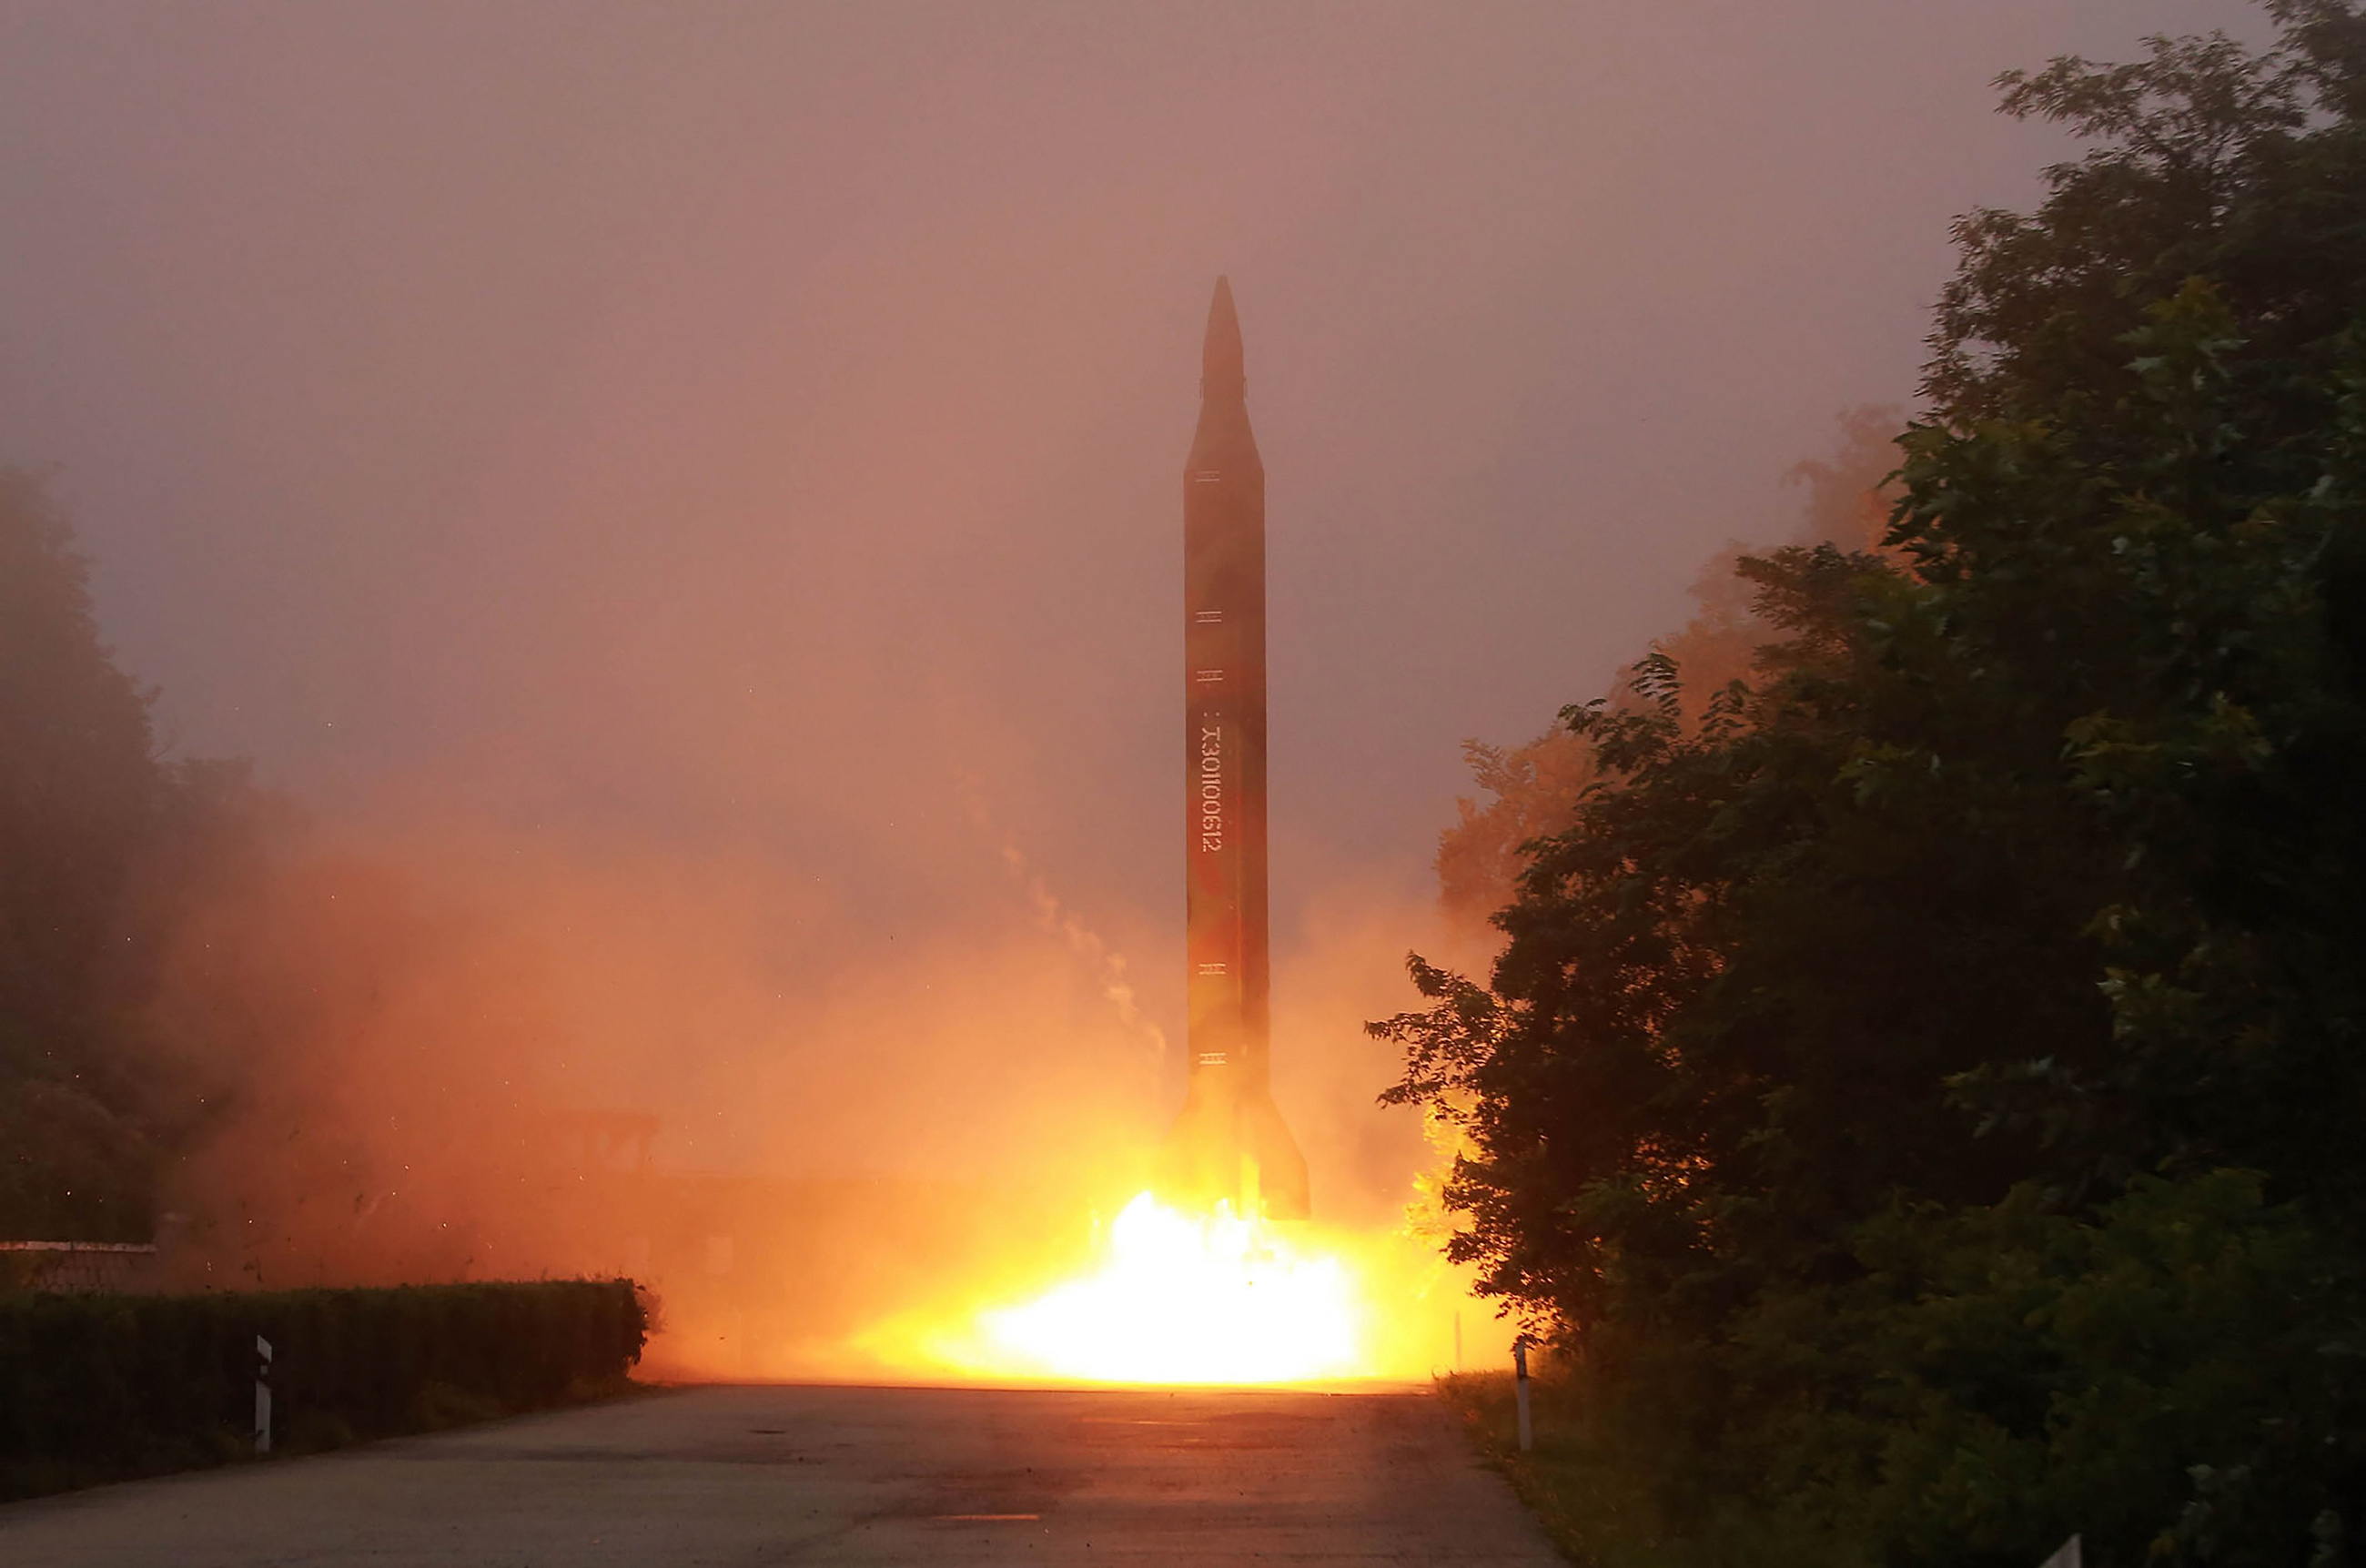 This undated photo released by North Korea's official Korean Central News Agency (KCNA) on July 21, 2016 shows a missile fired during a drill by Hwasong artillery units of the Strategic Force of the Korean People's Army. North Korea said on July 20 its latest ballistic missile tests trialled detonation devices for possible nuclear strikes on US targets in South Korea and were personally monitored by supreme leader Kim Jong-Un. / AFP PHOTO / KCNA VIA KNS / KCNA